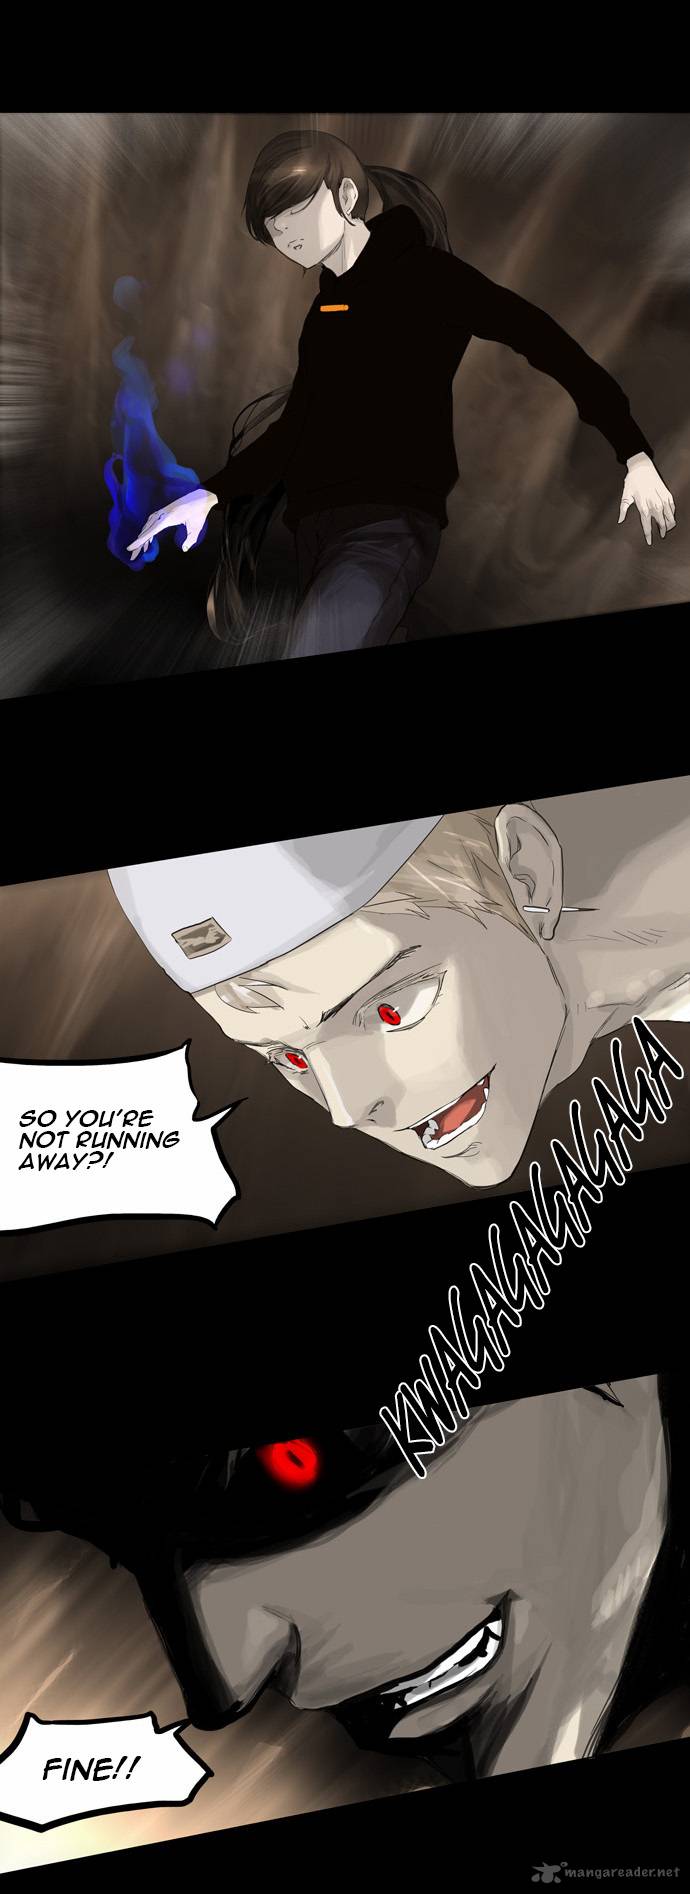 Tower Of God 113 11